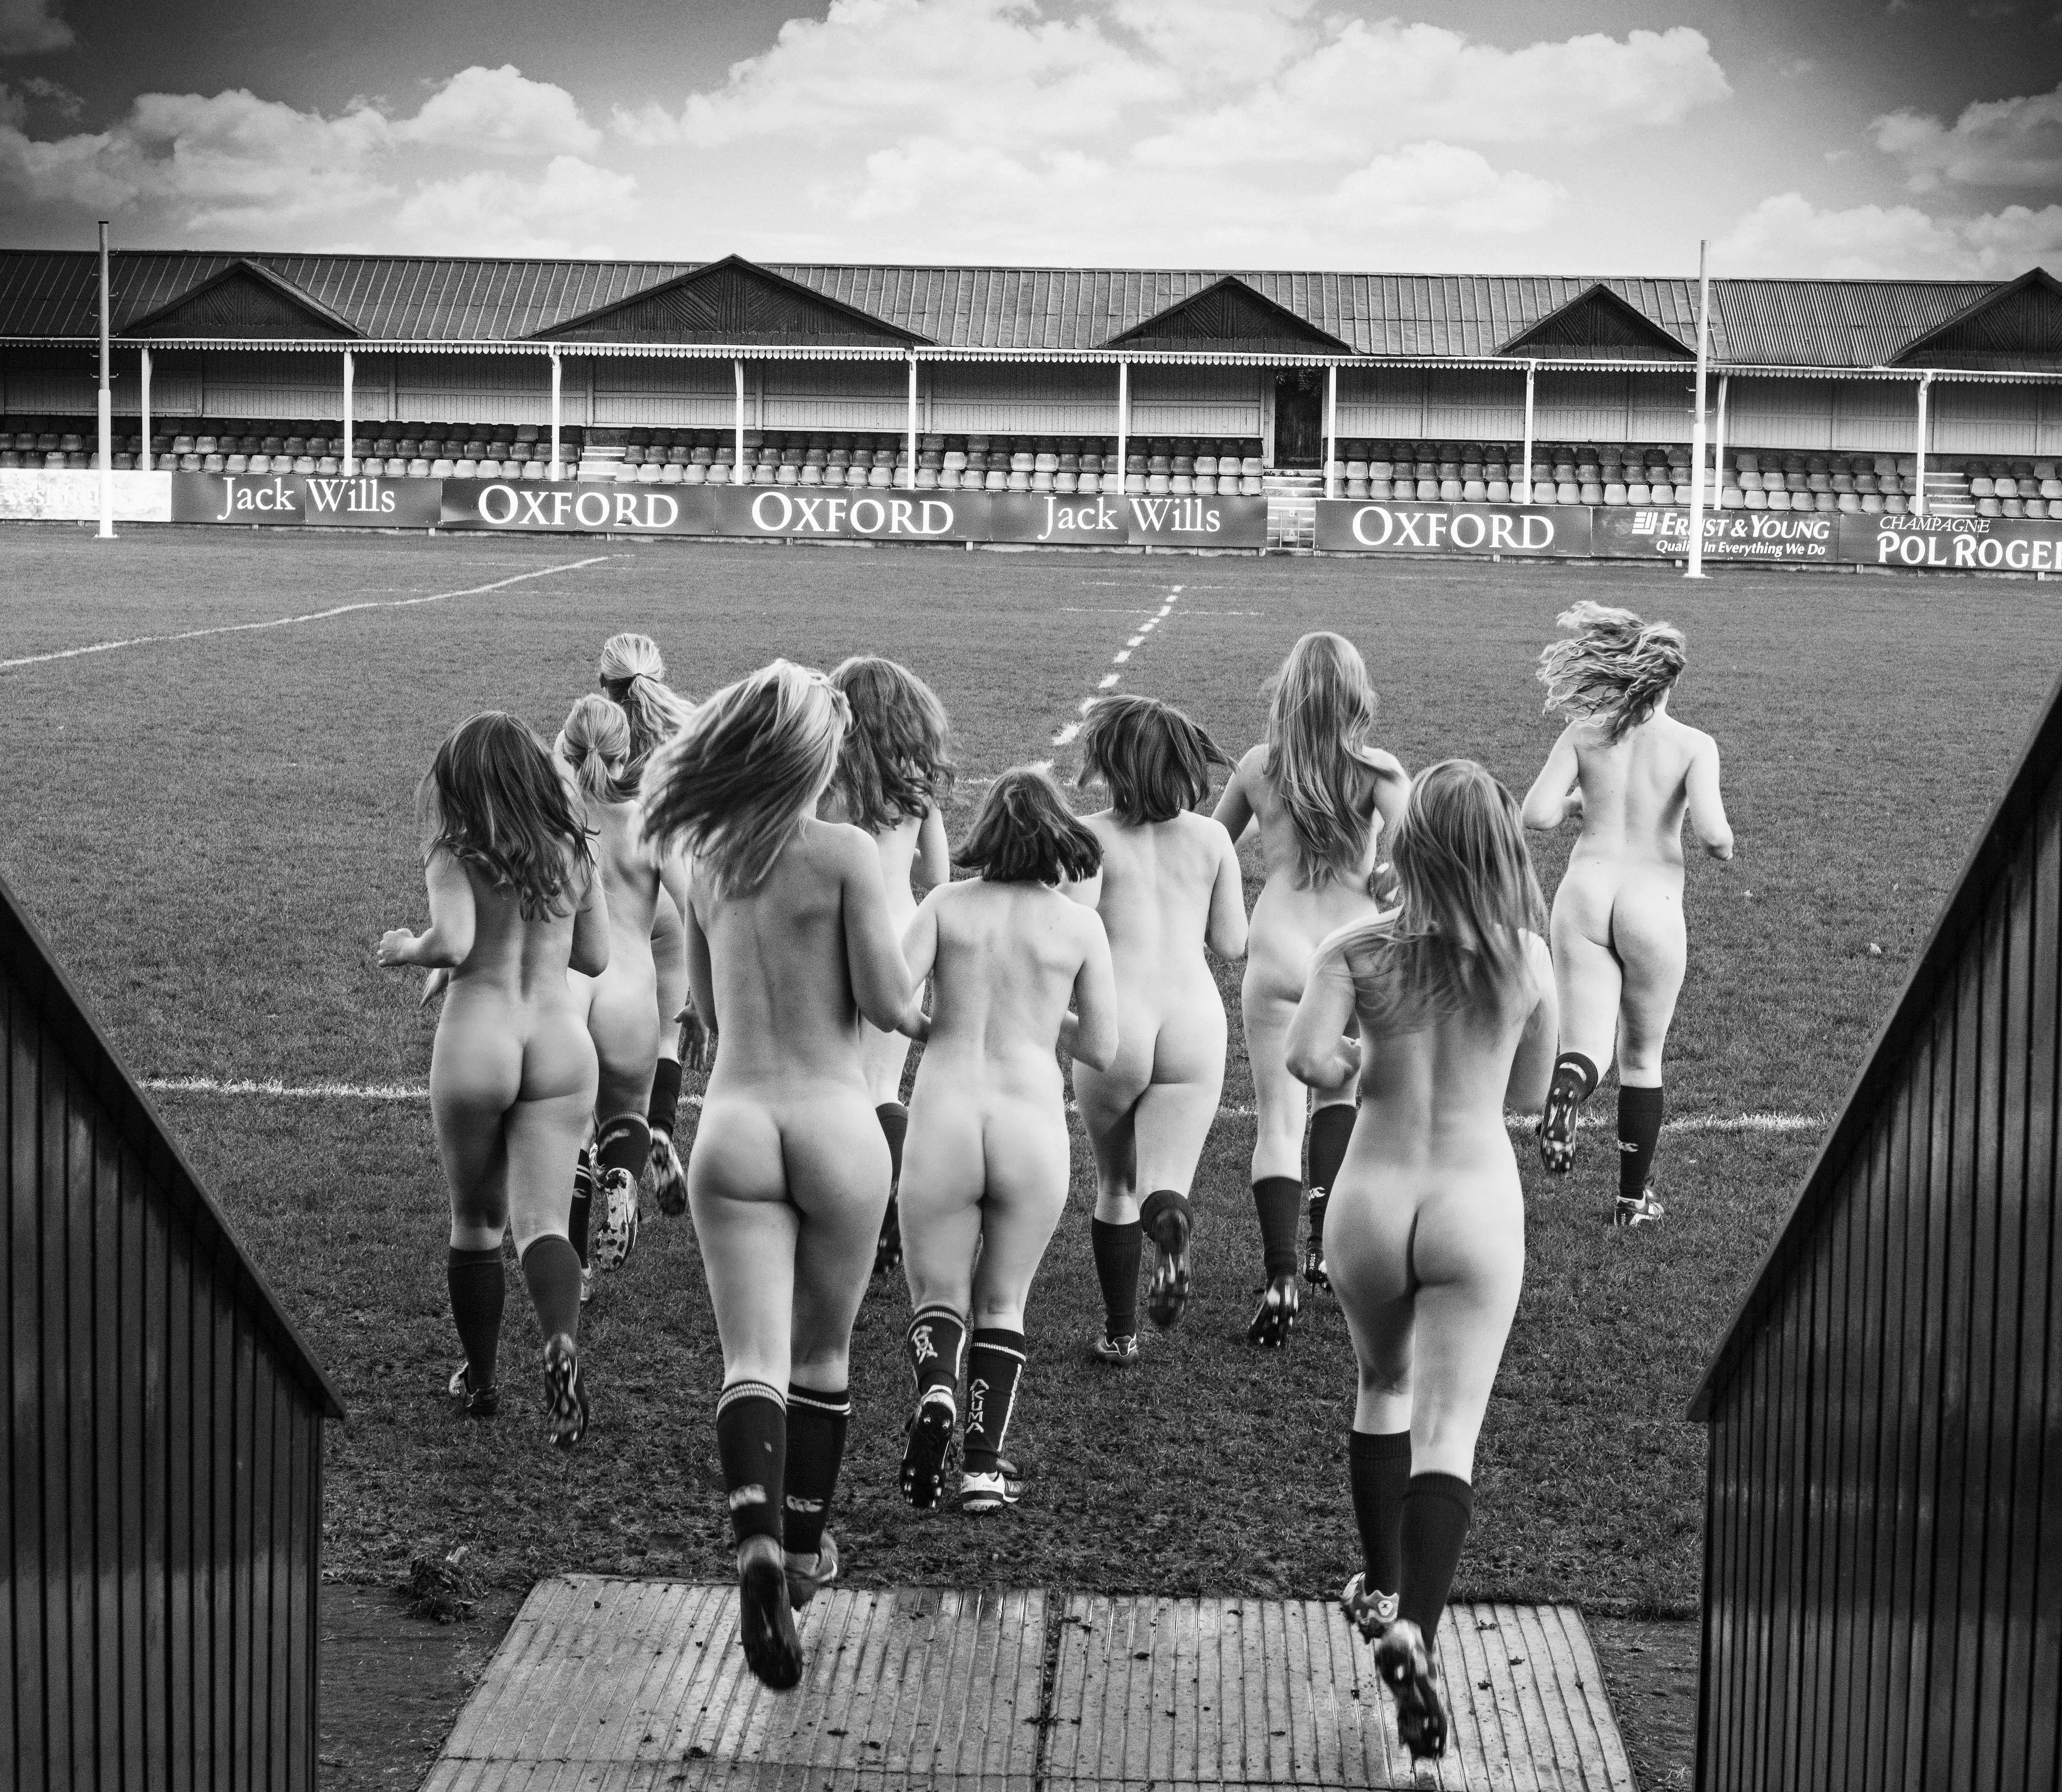 Nude Calendar Featuring Oxford Women's Rugby Team Is For Goo